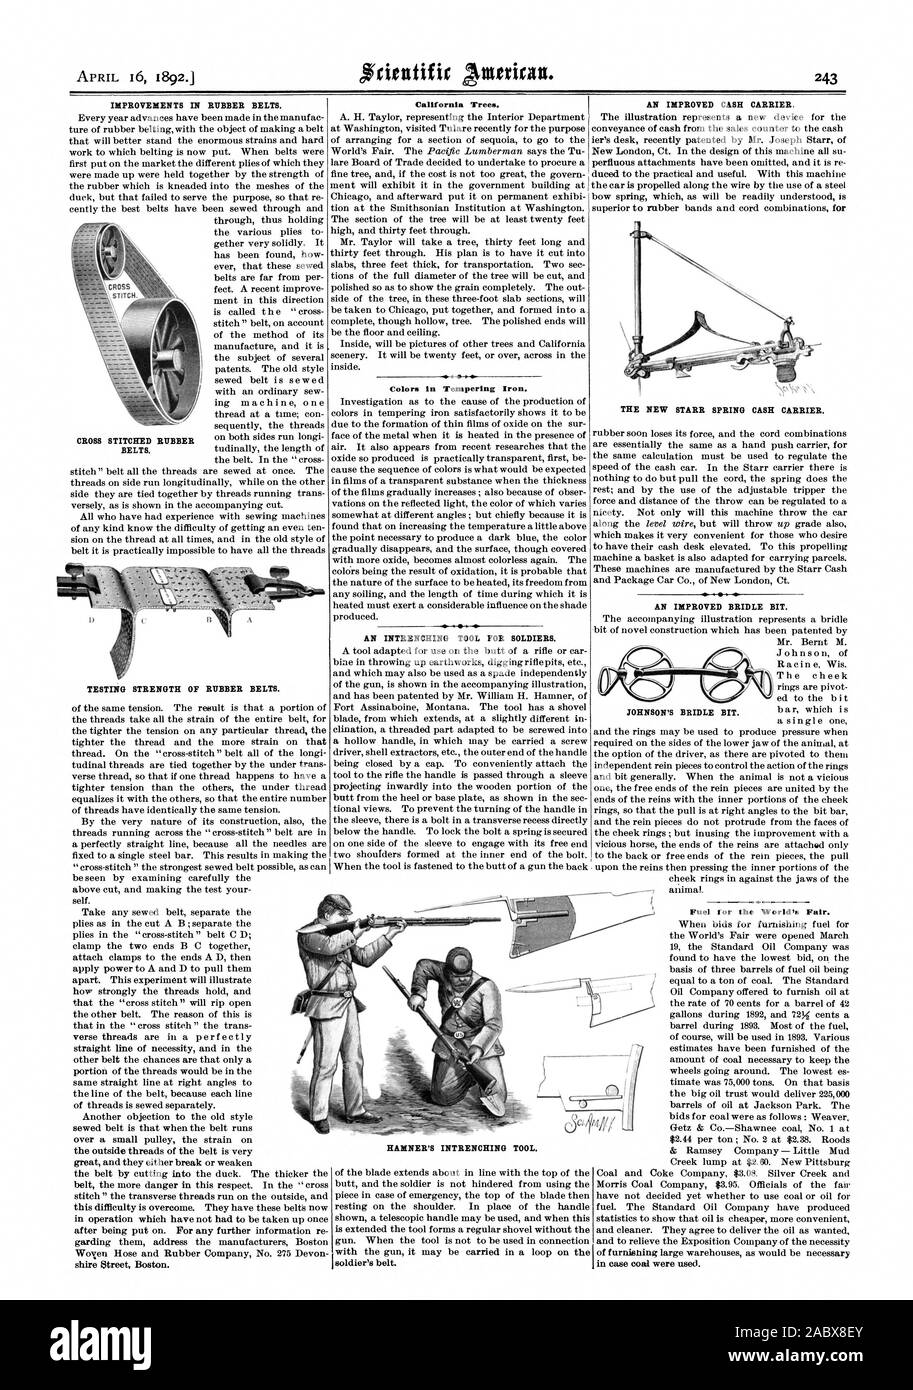 IMPROVEMENTS IN RUBBER BELTS. California Trees. Colors in Tempering Iron. AN INTRENCHING TOOL FOR SOLDIERS. AN IMPROVED CASH CARRIER THE NEW STARR SPRING CASH CARRIER. AN IMPROVED BRIDLE BIT. Fuel for the World's Fair. CROSS STITCHED RUBBER BELTS. TESTING STRENGTH OF RUBBER BELTS. JOHNSON'S BRIDLE BIT. HAMNER'S INTRENCHING TOOL., scientific american, 1892-04-16 Stock Photo